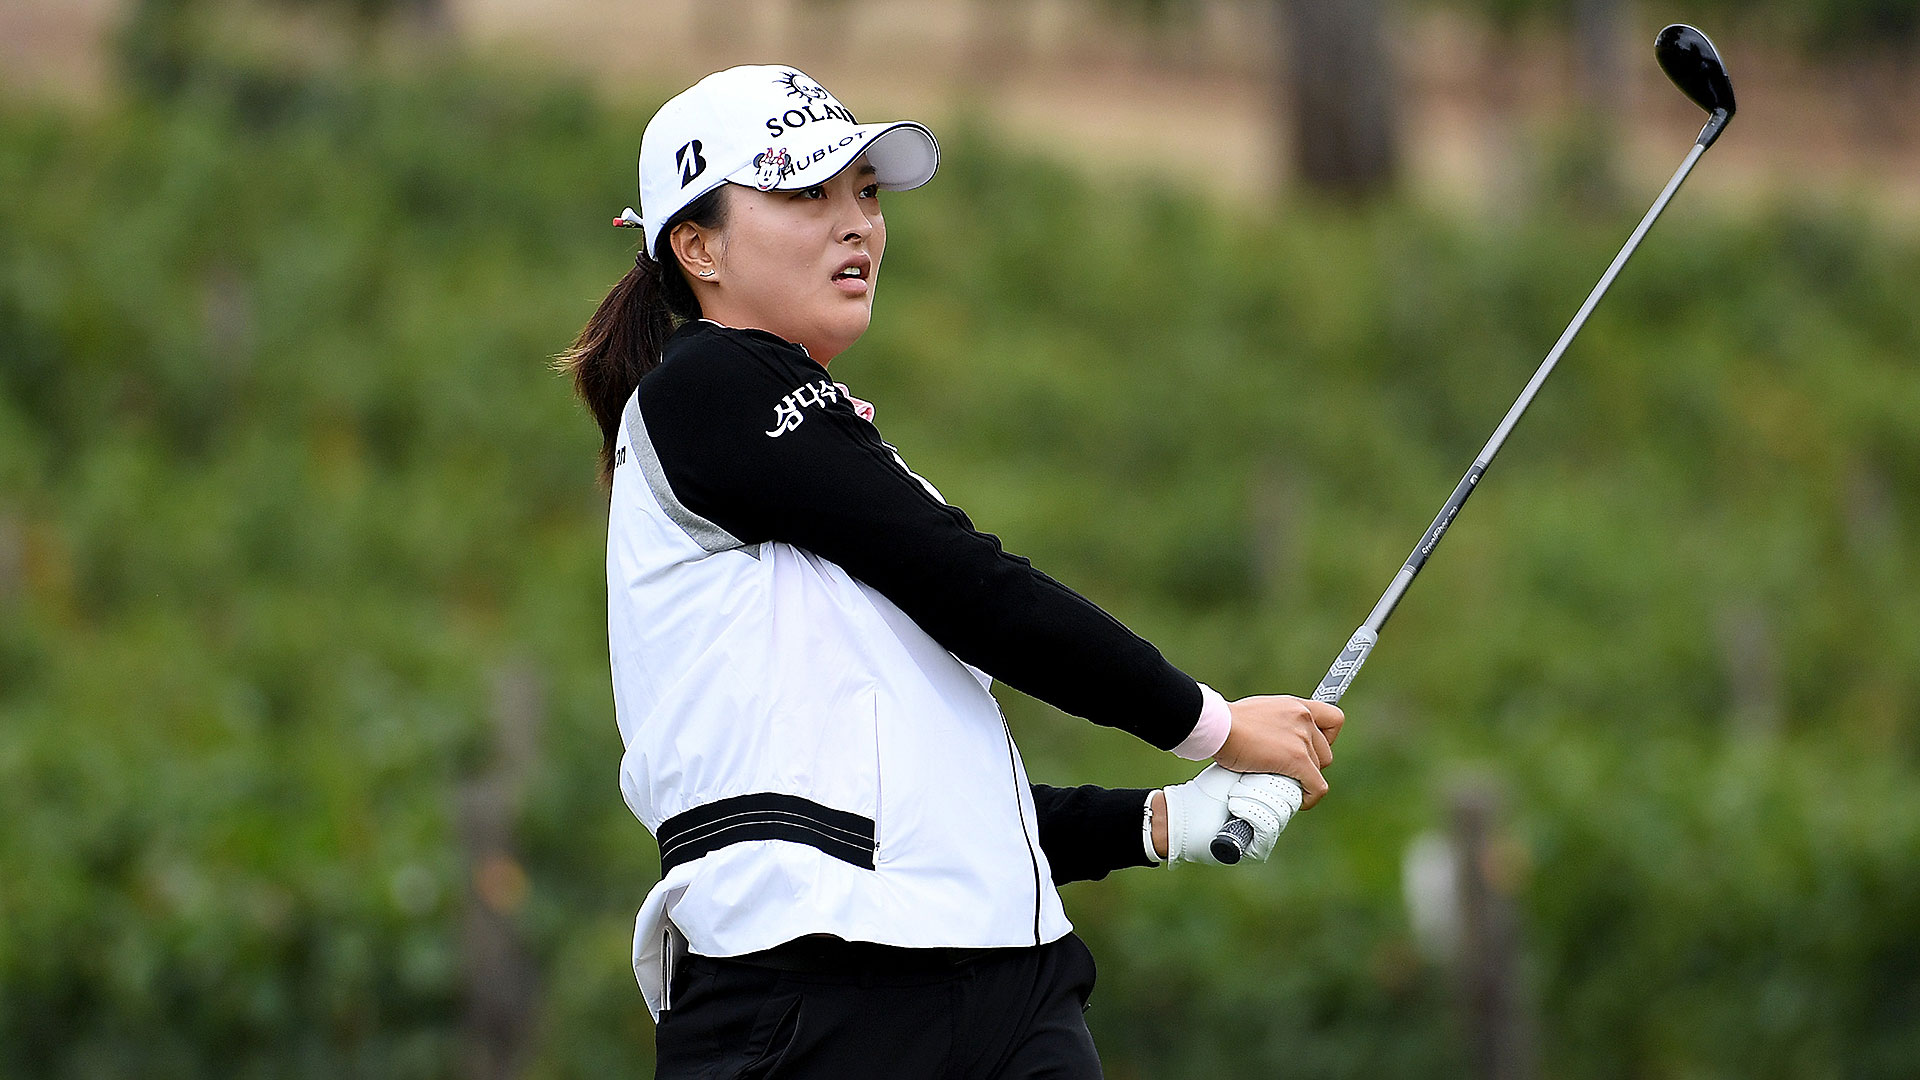 Former world No. 1 Jin Young Ko leads midway through Portland Classic